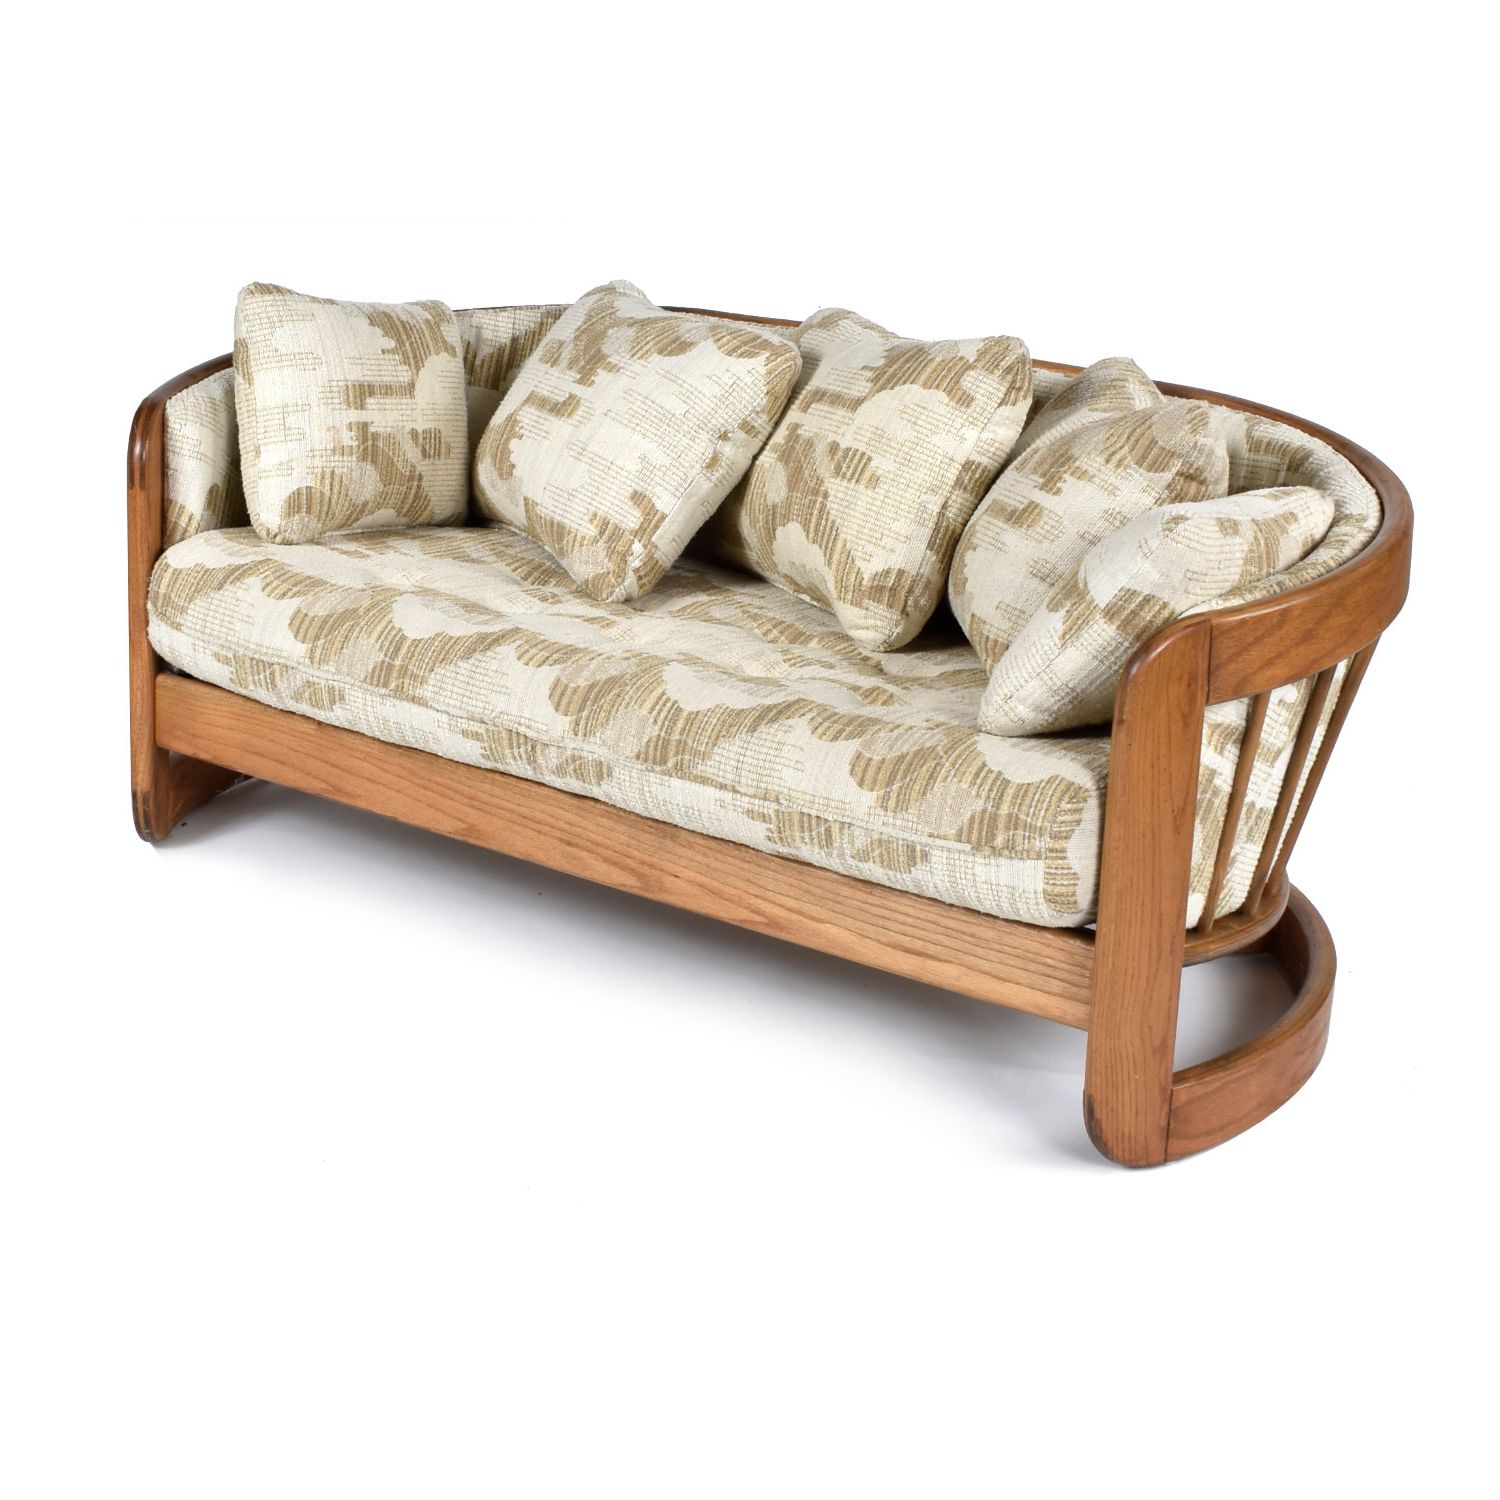 Beige Spindle Back Curved Solid Oak Wood Crescent Shaped Loveseat With Regard To Couches Love Seats With Wood Frame (View 6 of 20)